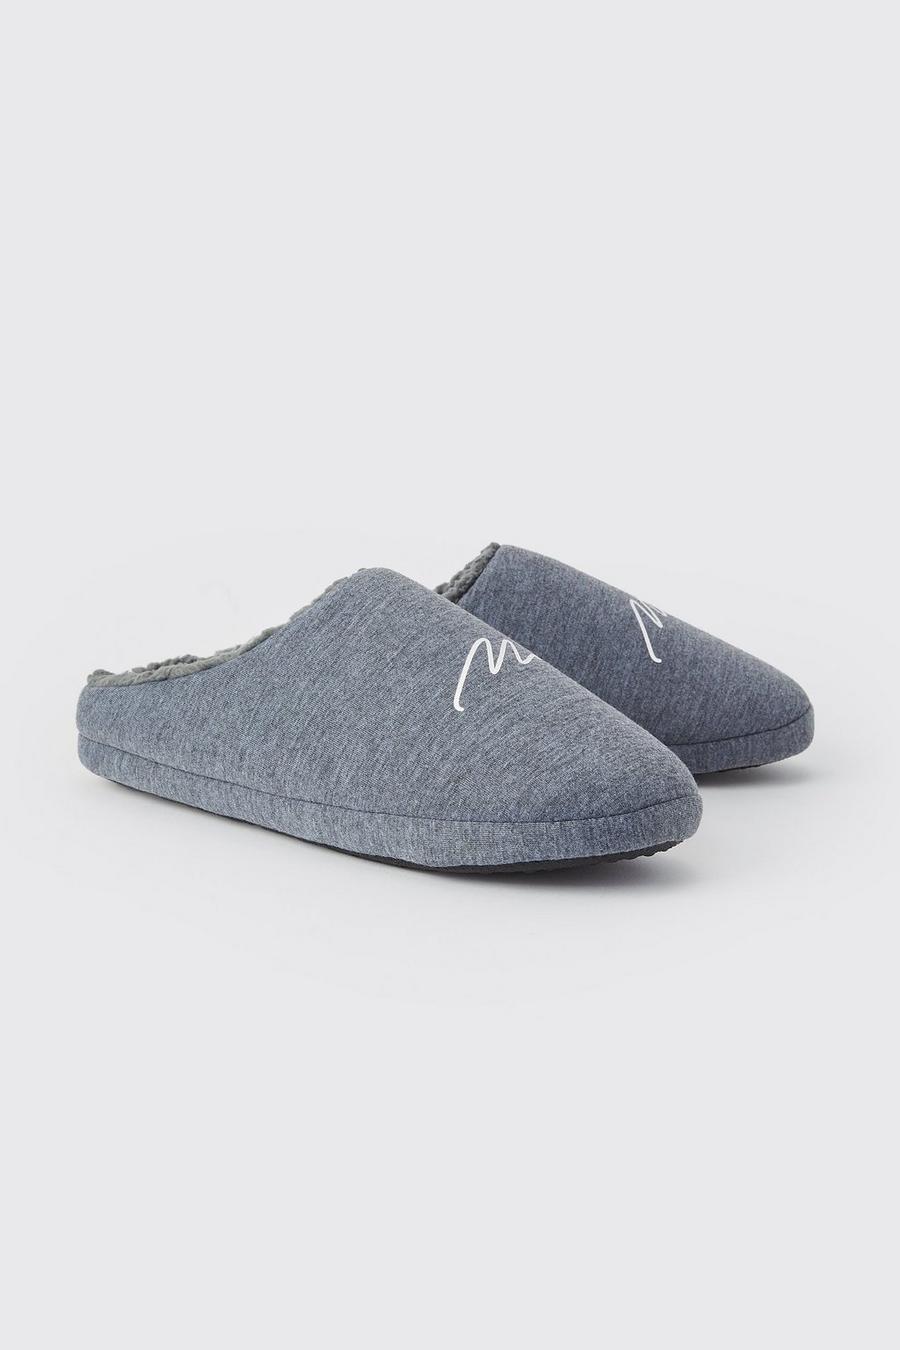 Charcoal Man Signature Slippers